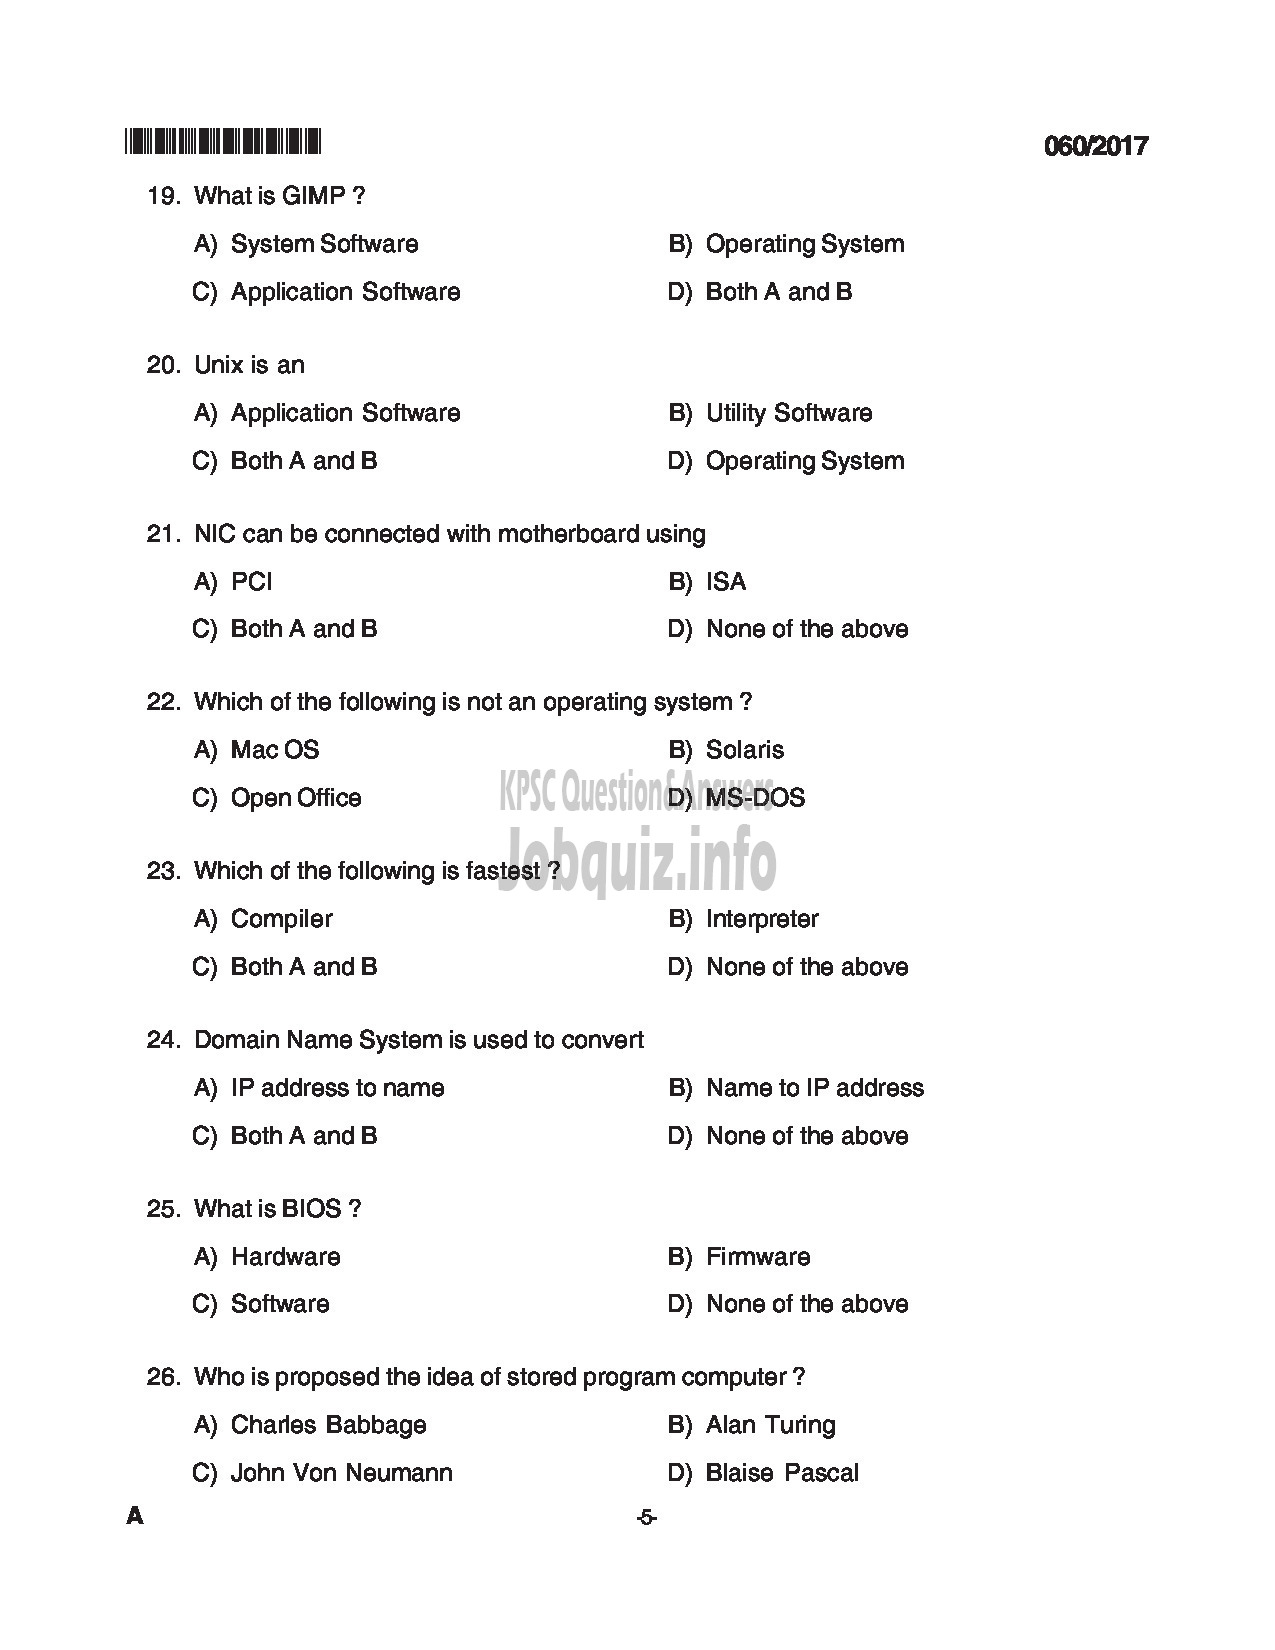 Kerala PSC Question Paper - TRADESMAN COMPUTER ENGINEERING TECHNICAL EDUCATION QUESTION PAPER-5